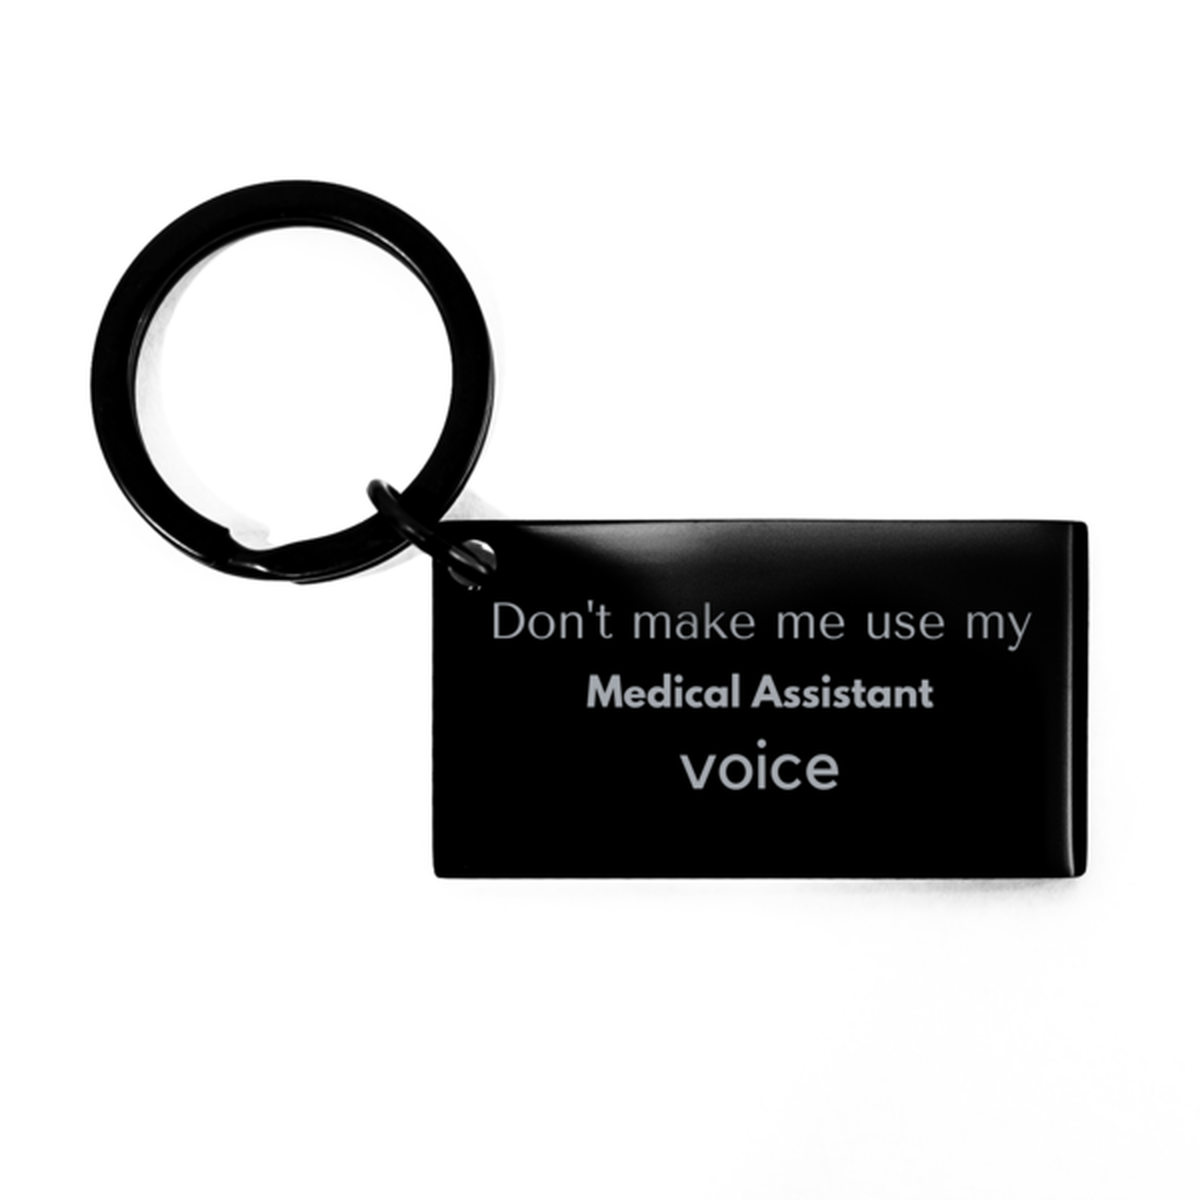 Don't make me use my Medical Assistant voice, Sarcasm Medical Assistant Gifts, Christmas Medical Assistant Keychain Birthday Unique Gifts For Medical Assistant Coworkers, Men, Women, Colleague, Friends